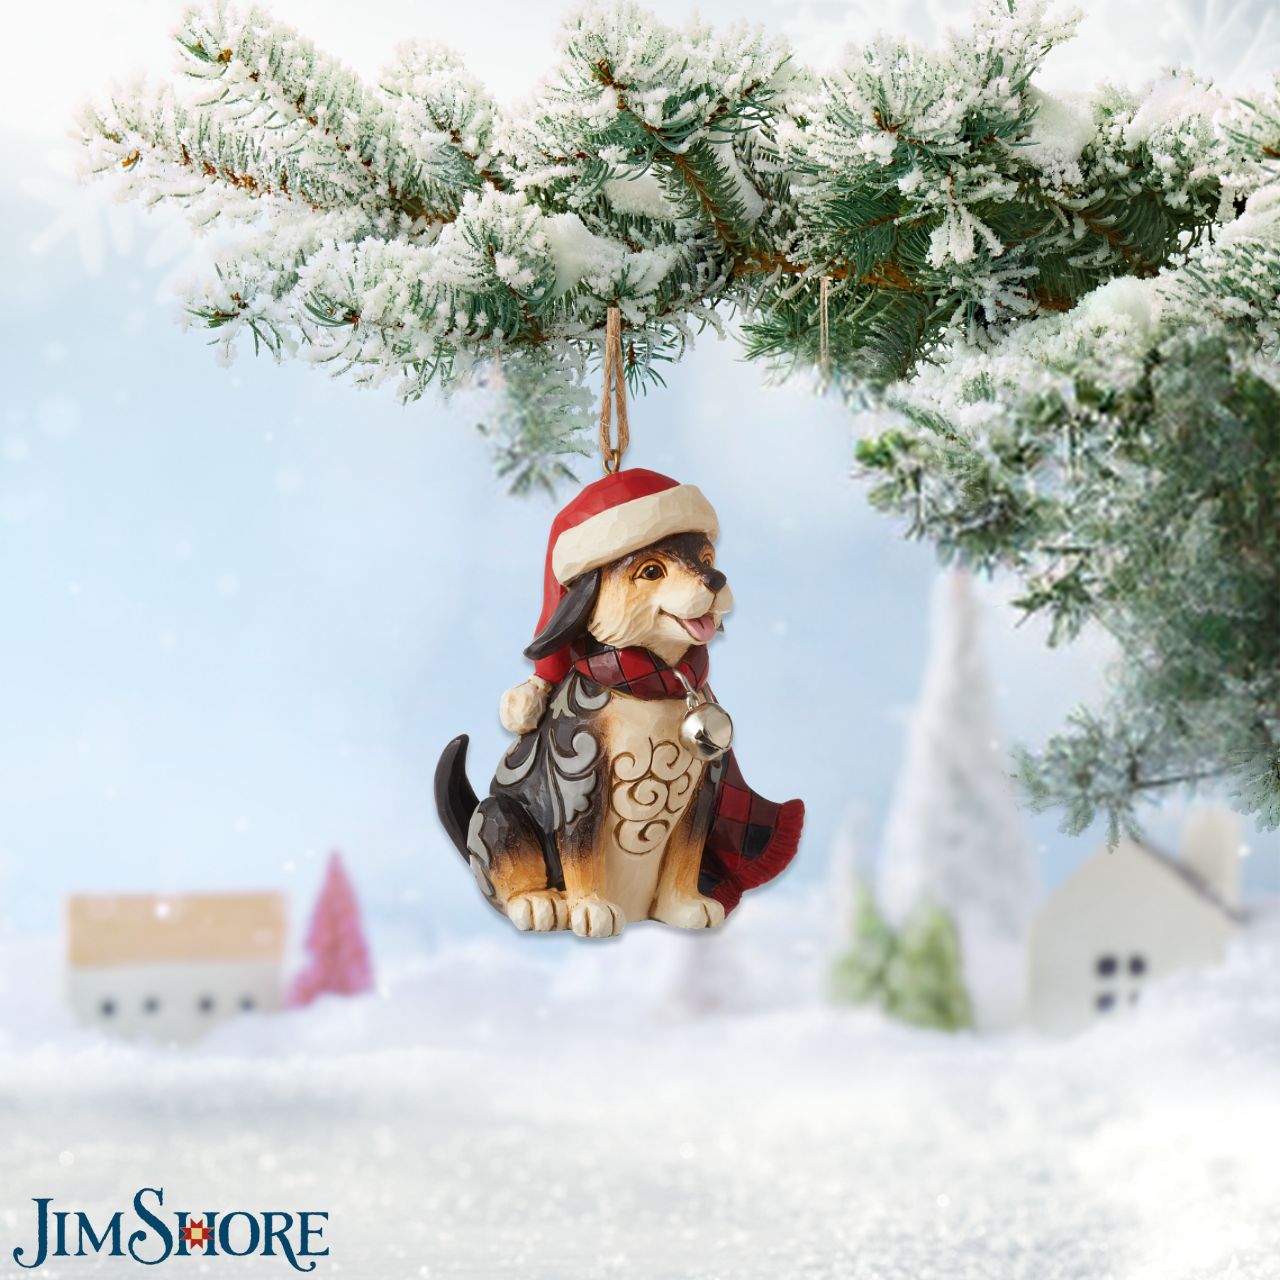 Heartwood Creek Highland Glen Dog in Scarf Hanging Ornament  Designed by award winning artist Jim Shore as part of the Heartwood Creek Highland Glen Collection, hand crafted using high quality cast stone and hand painted, this cute dog hanging ornament is perfect for the Christmas season.